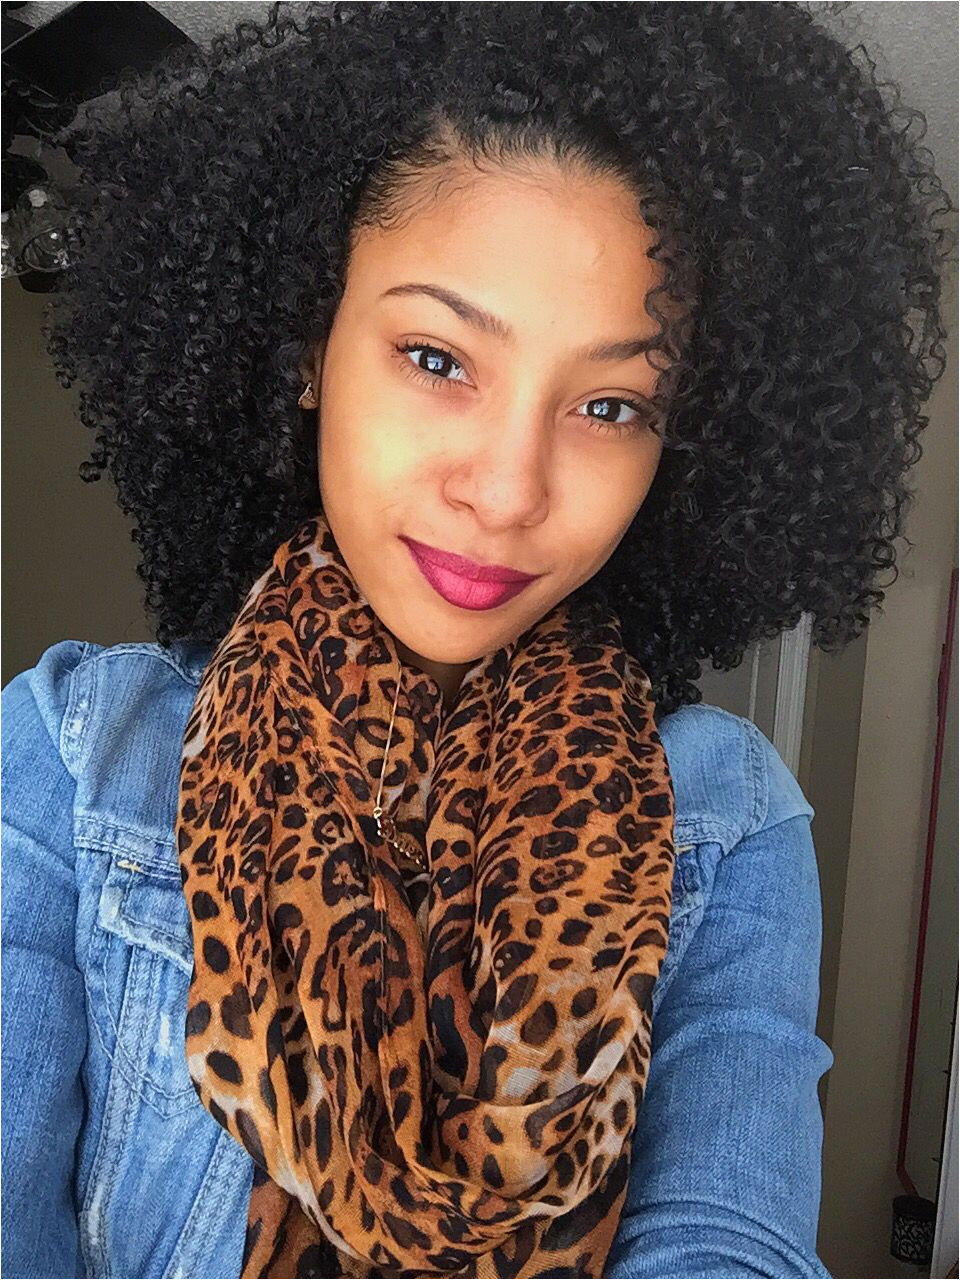 3c Easy Hairstyles 3c Curly Hair for the Culture In 2019 Pinterest